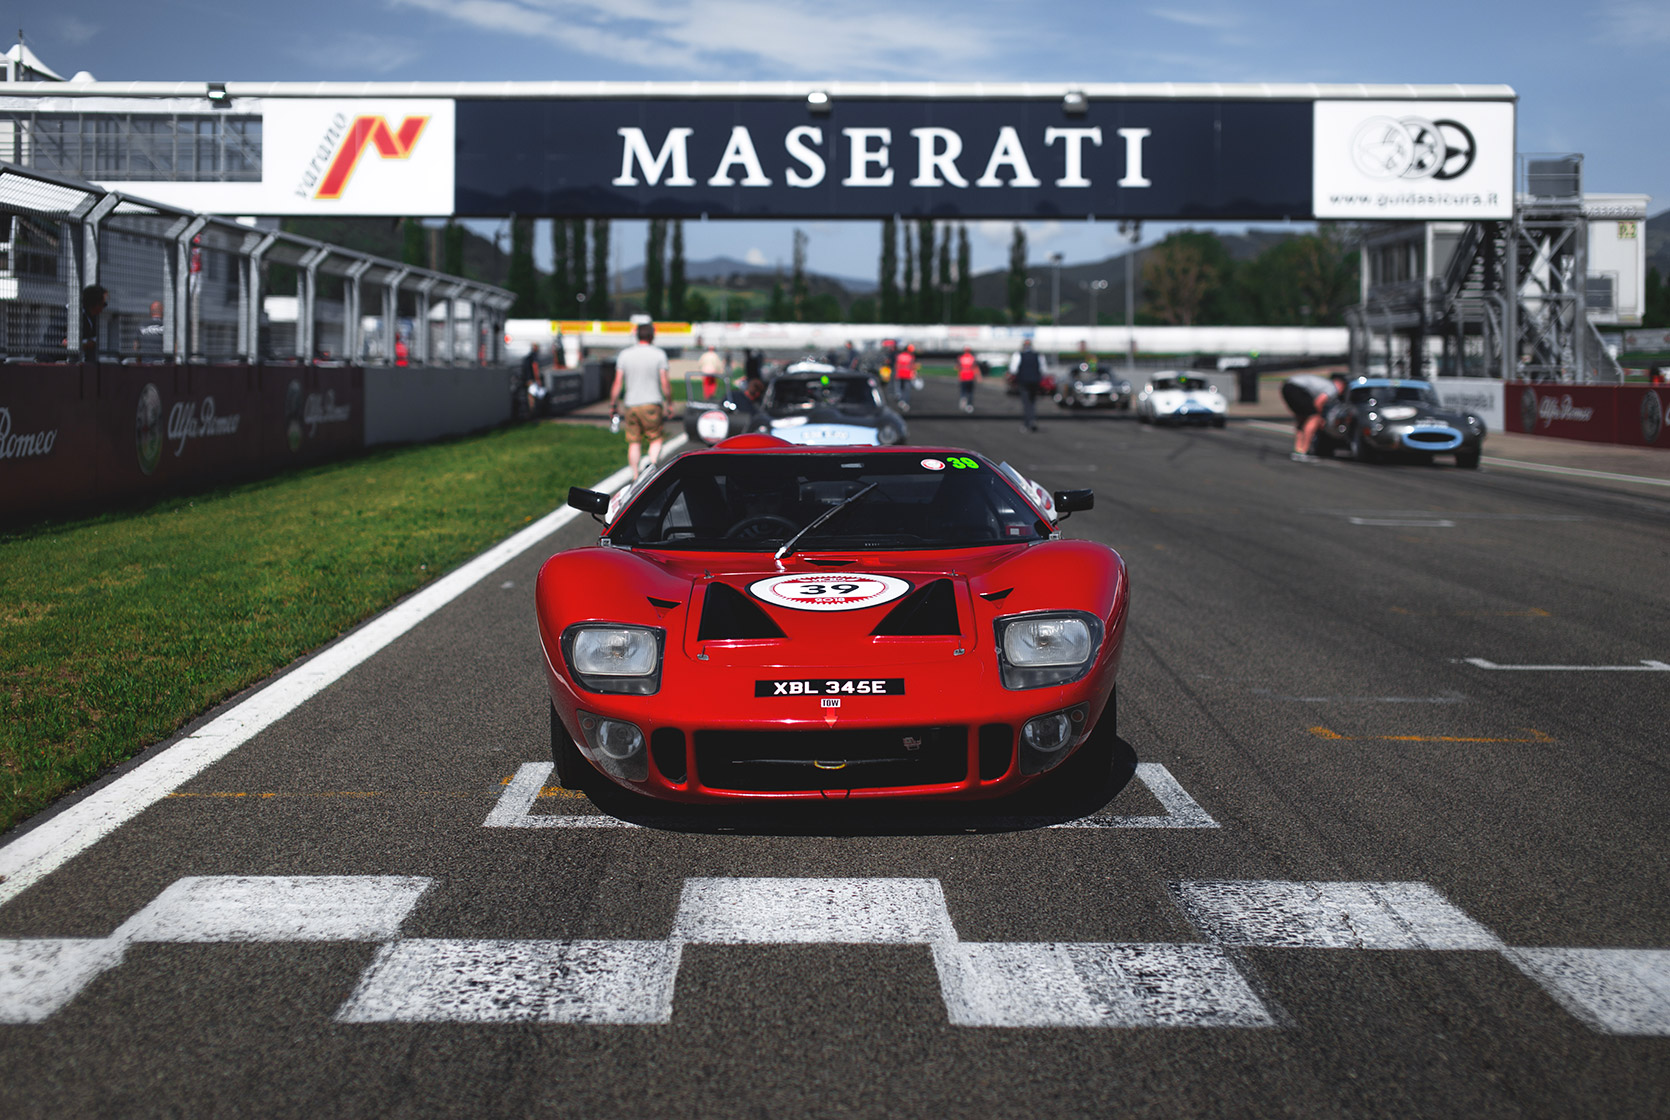 A Ford GT40 poleposition at the starting grid in Autodromo Varano De Melegari at Modena 100 Ore